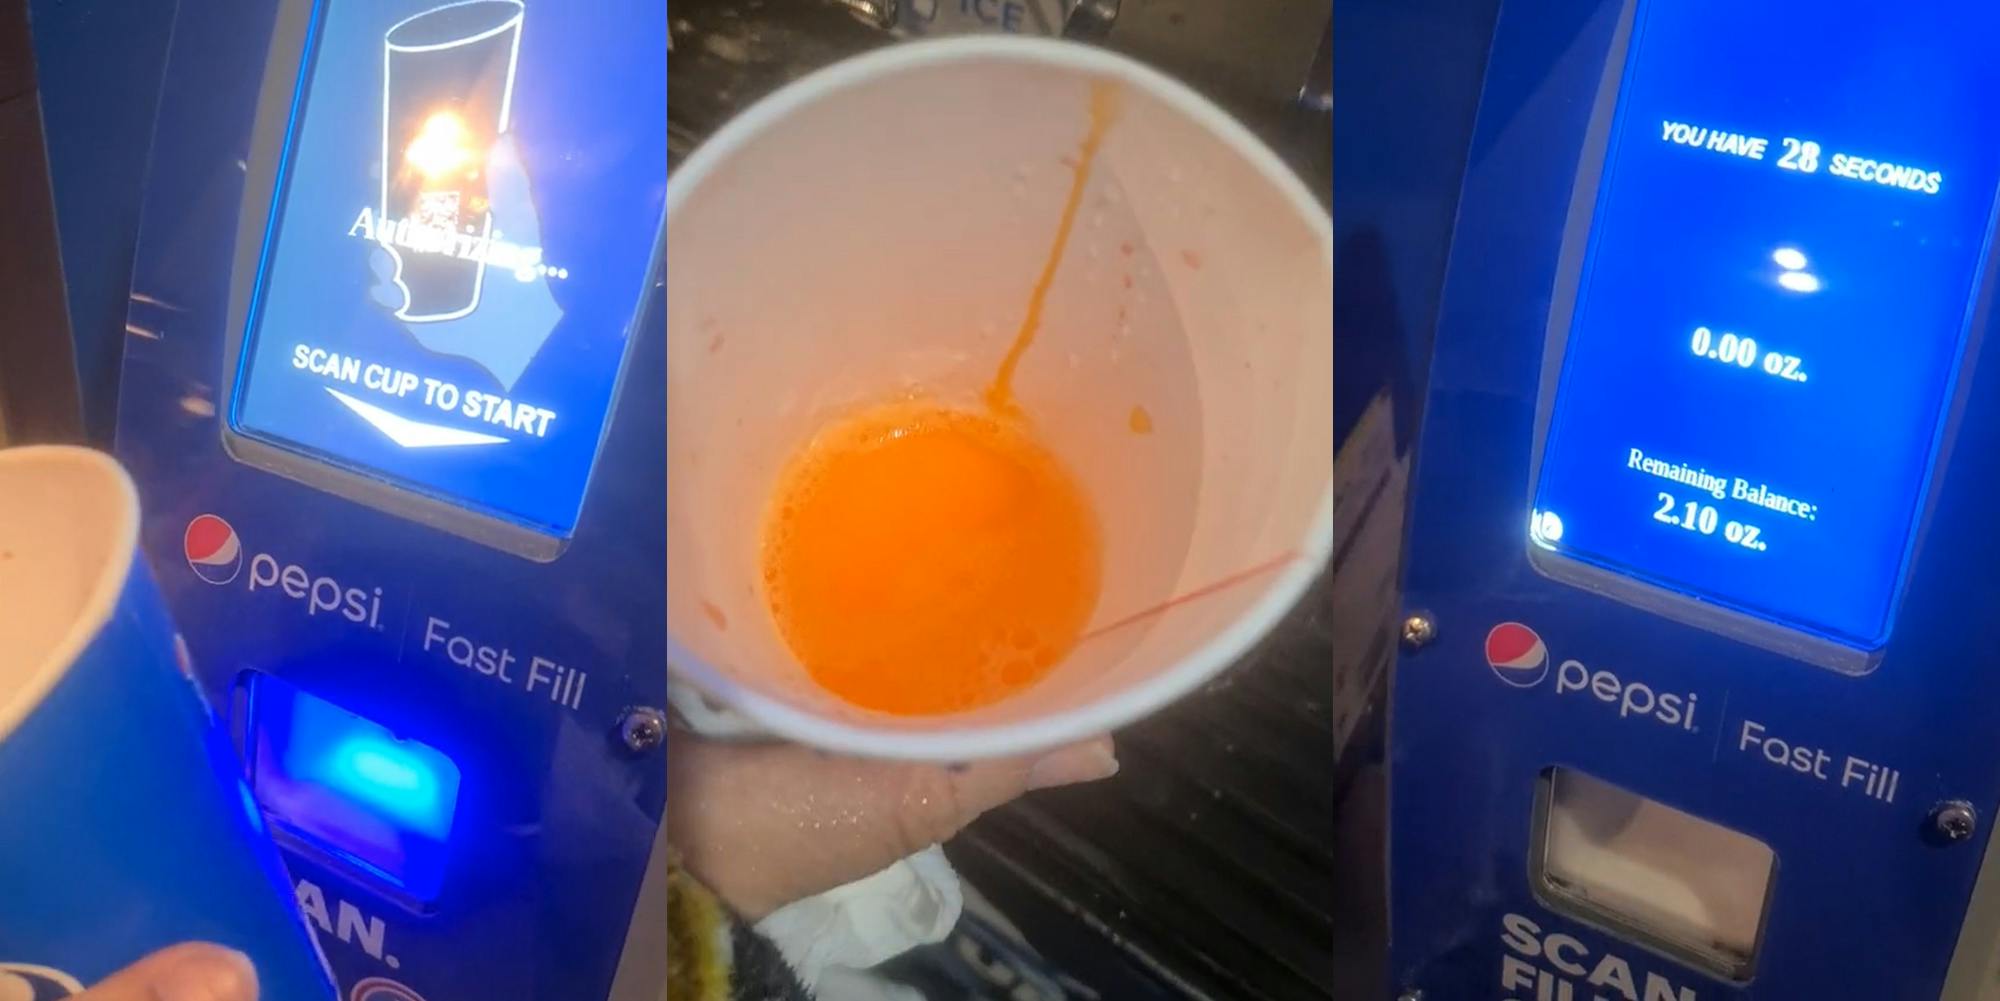 person holding Pepsi cup up to machine to scan QR code (l) cut with small amount of orange soda poured inside from soda dispenser (c) Pepsi Fast Fill machine with screen reading "YOU HAVE 28 SECONDS" (r)